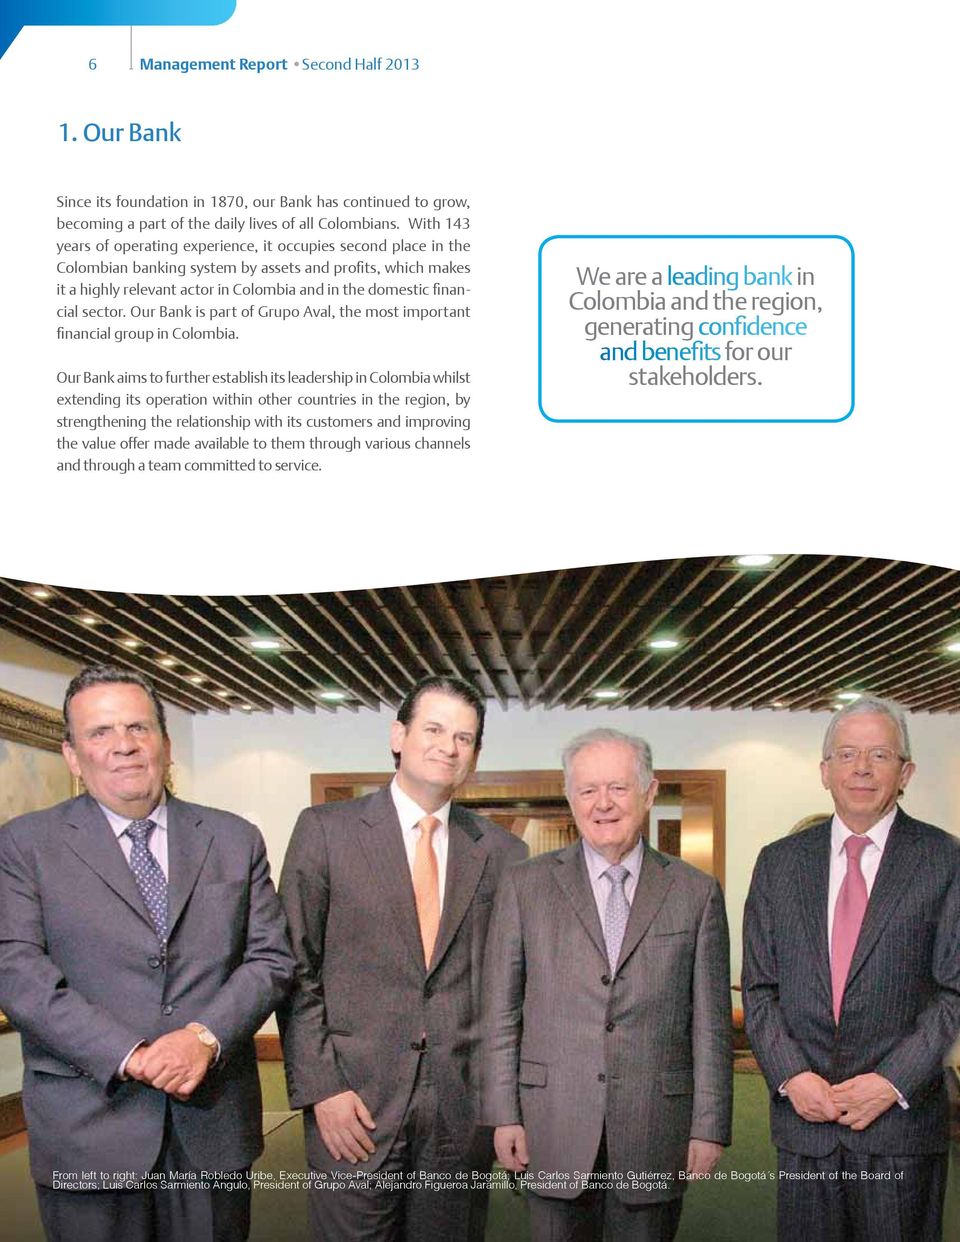 financial sector. Our Bank is part of Grupo Aval, the most important financial group in Colombia.